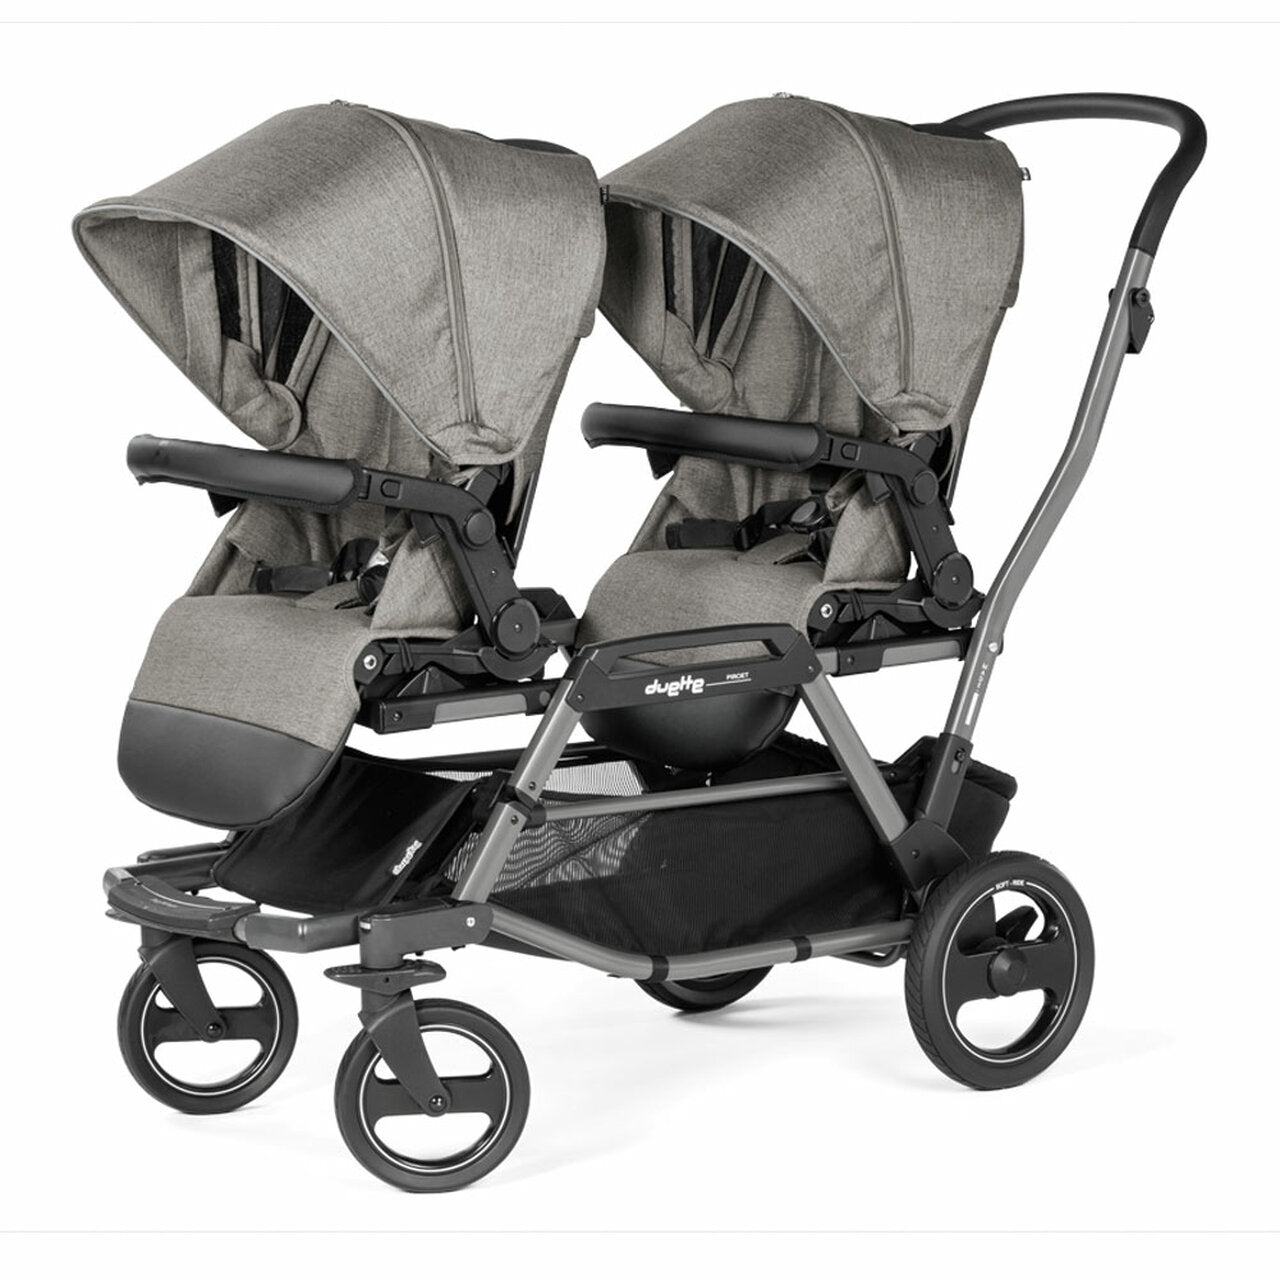 Peg Perego Duette Piroet Baby Stroller with Seats & Chassis included, City Grey - ANB Baby -$500 - $1000